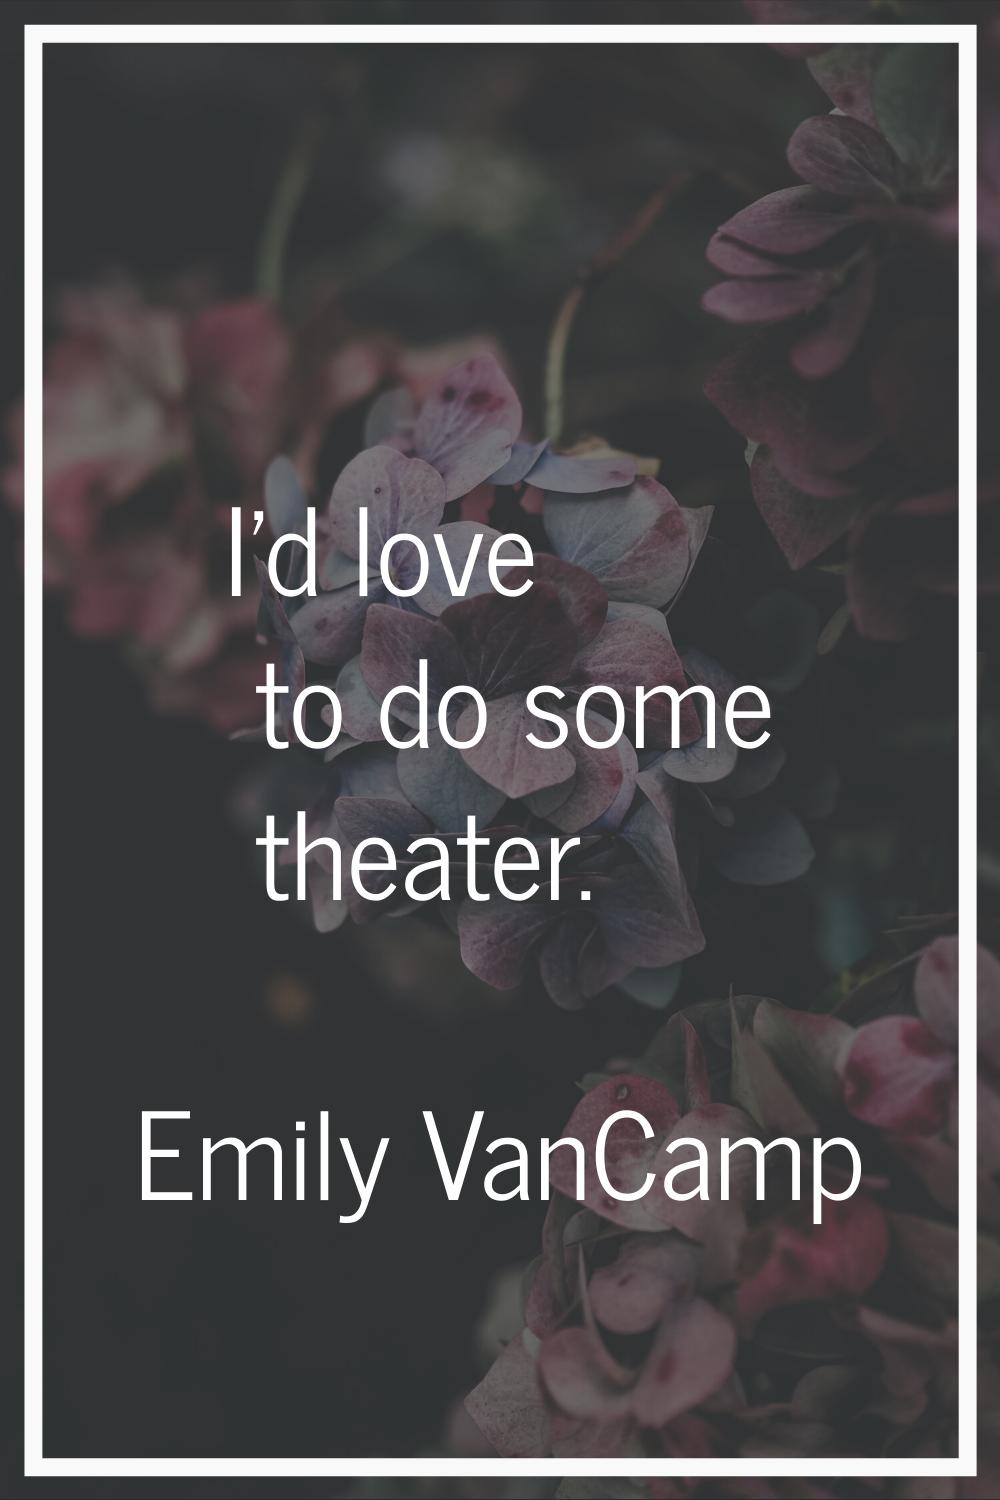 I'd love to do some theater.